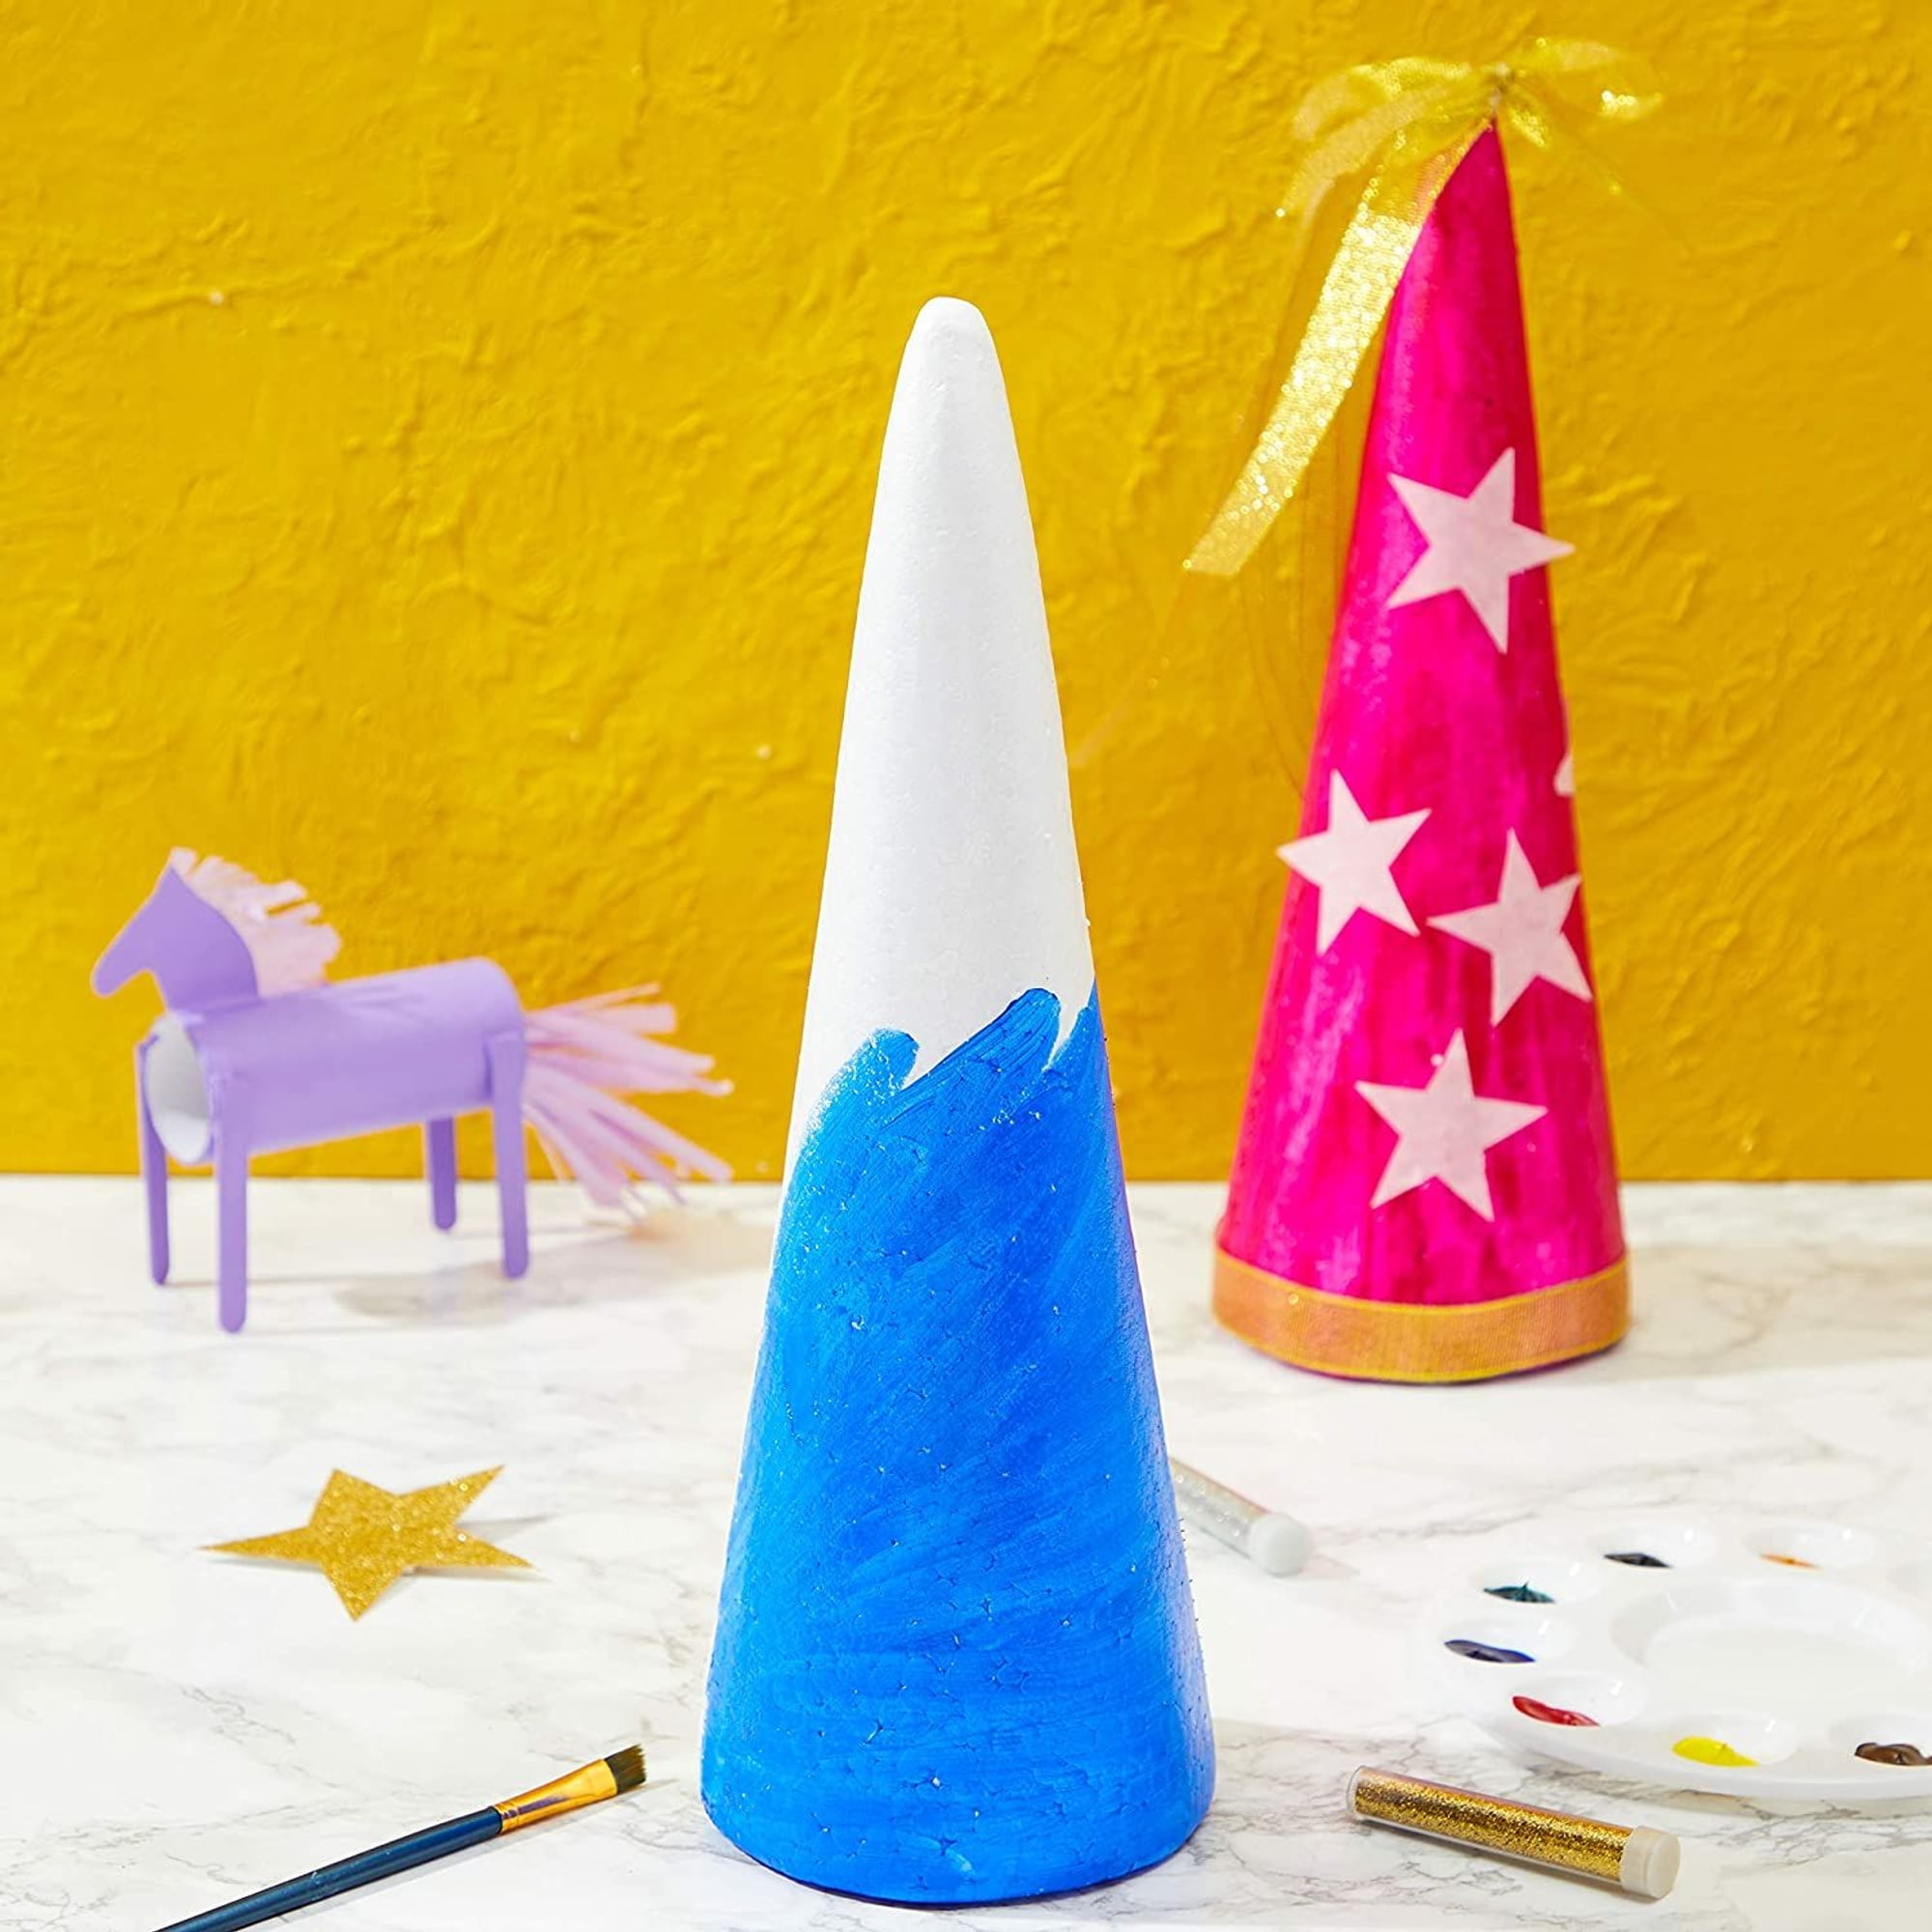 Bright Creations Foam Cones, Arts and Crafts Supplies (White, 5.25